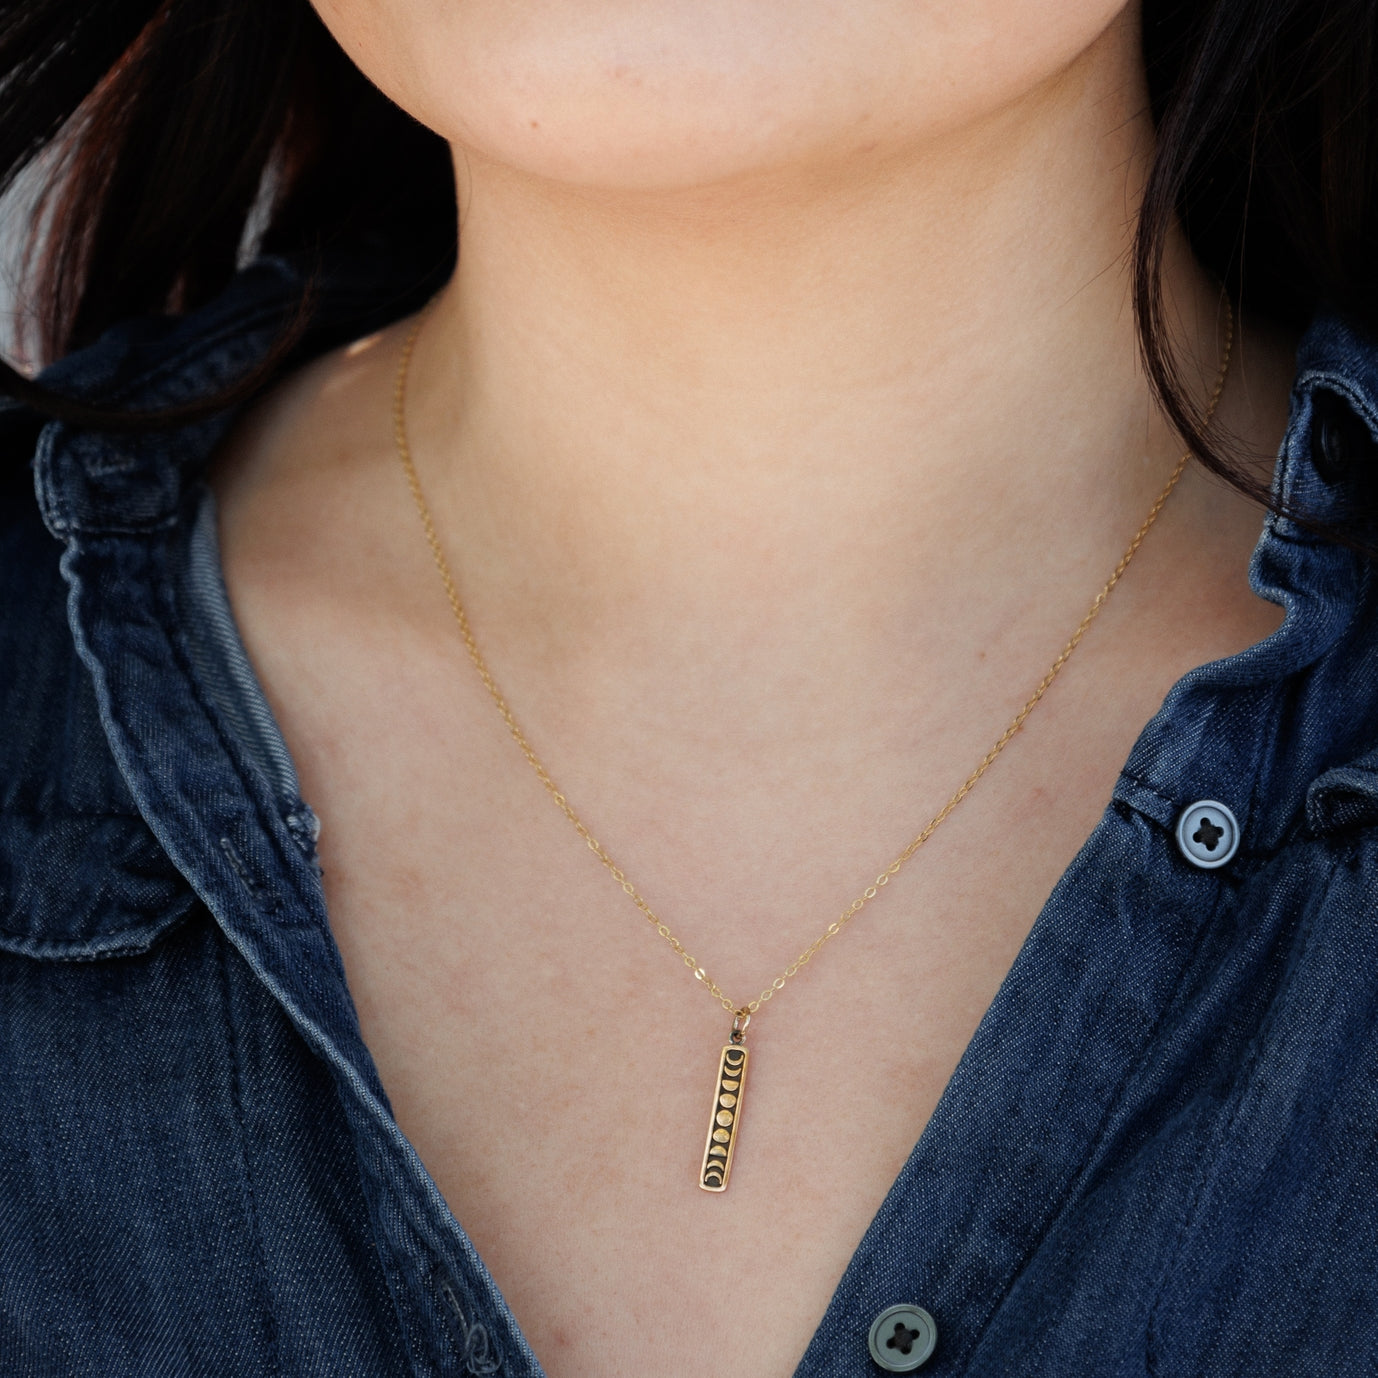 Gold Vertical Moon Phase Necklace